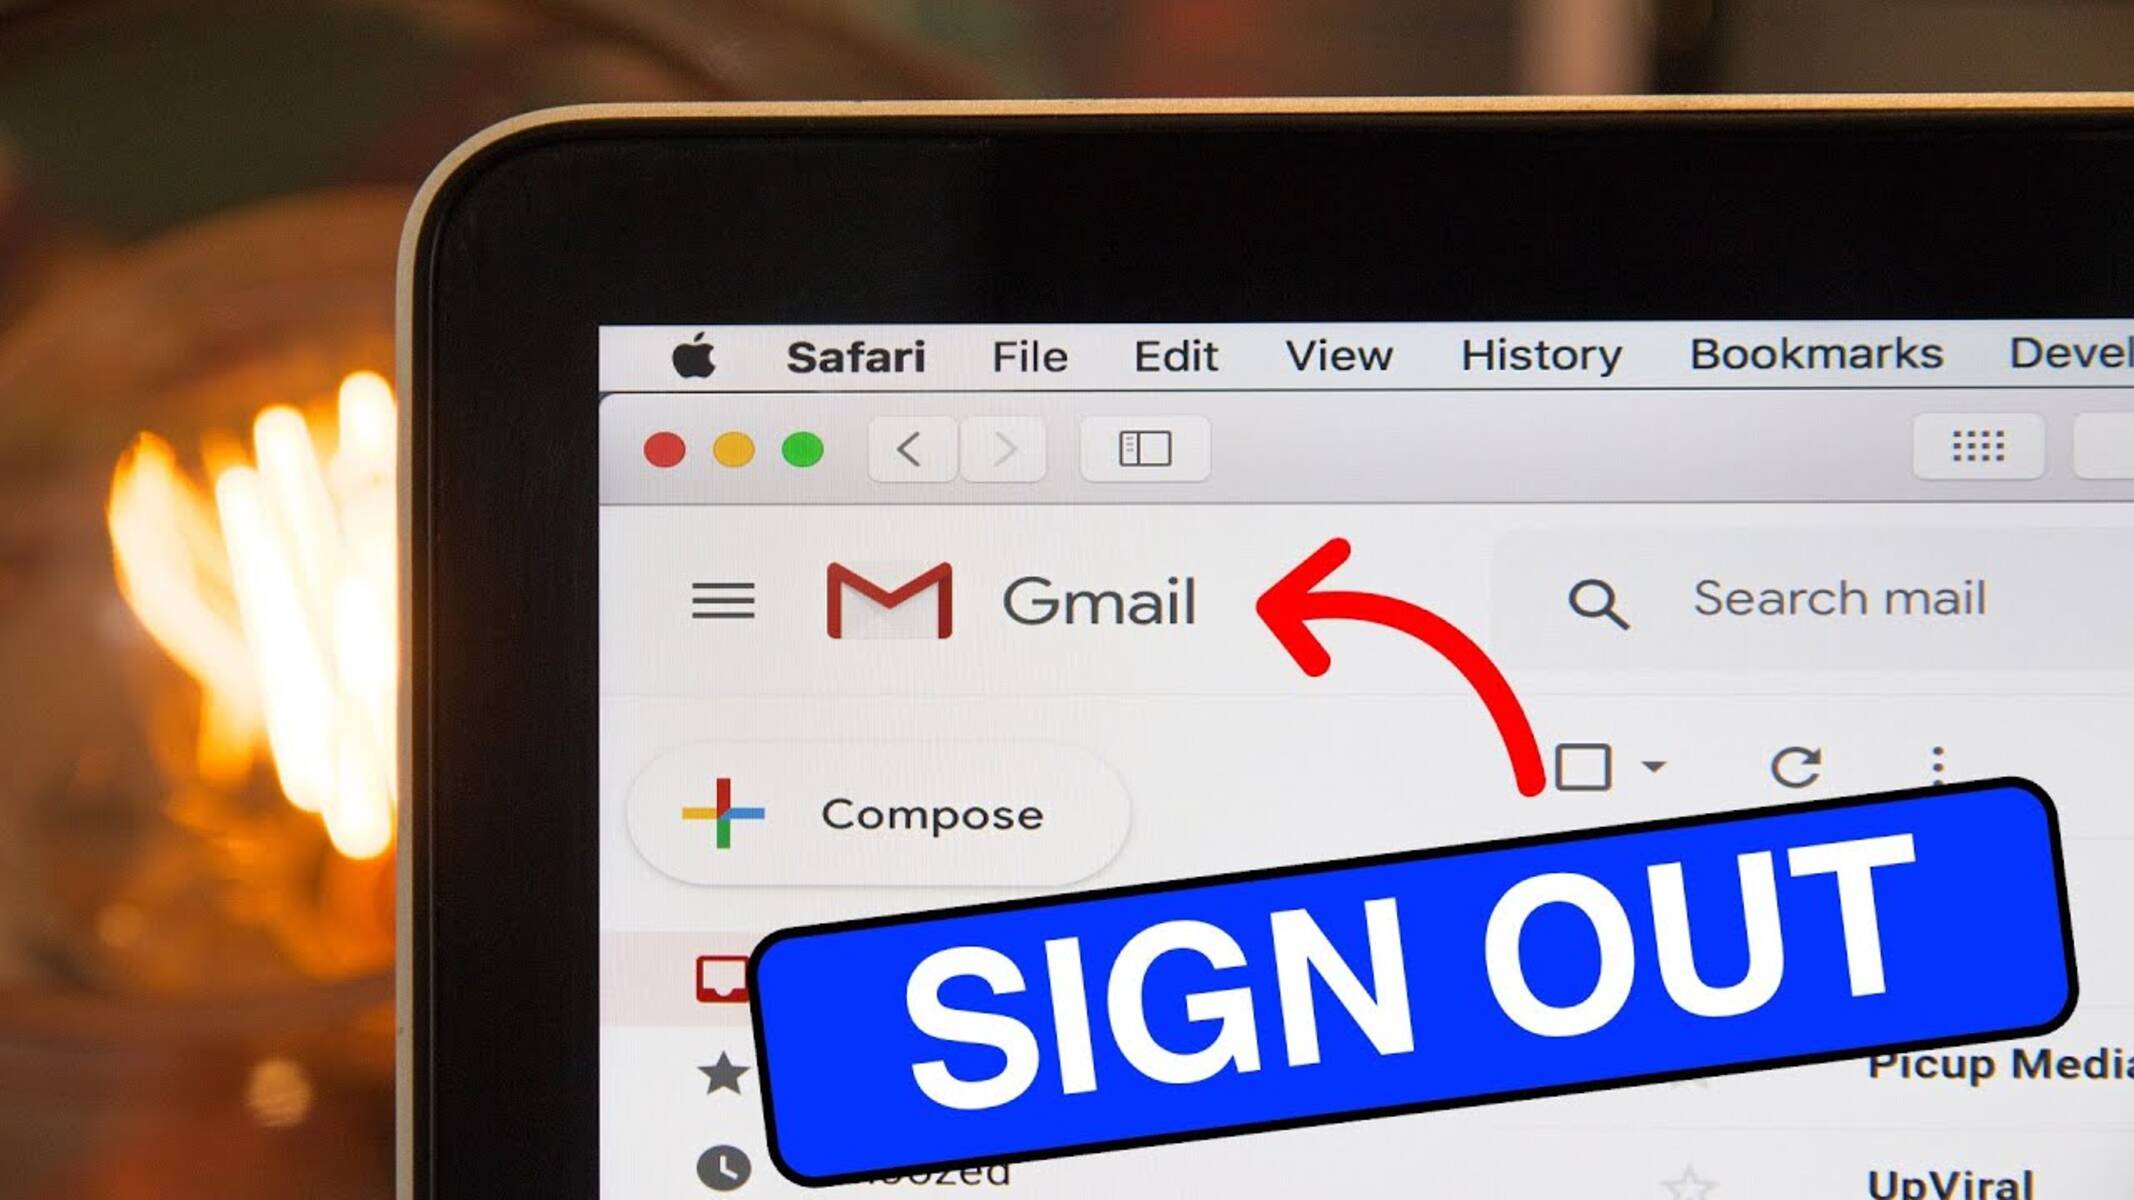 How To Sign Out Of A Google Account On Safari